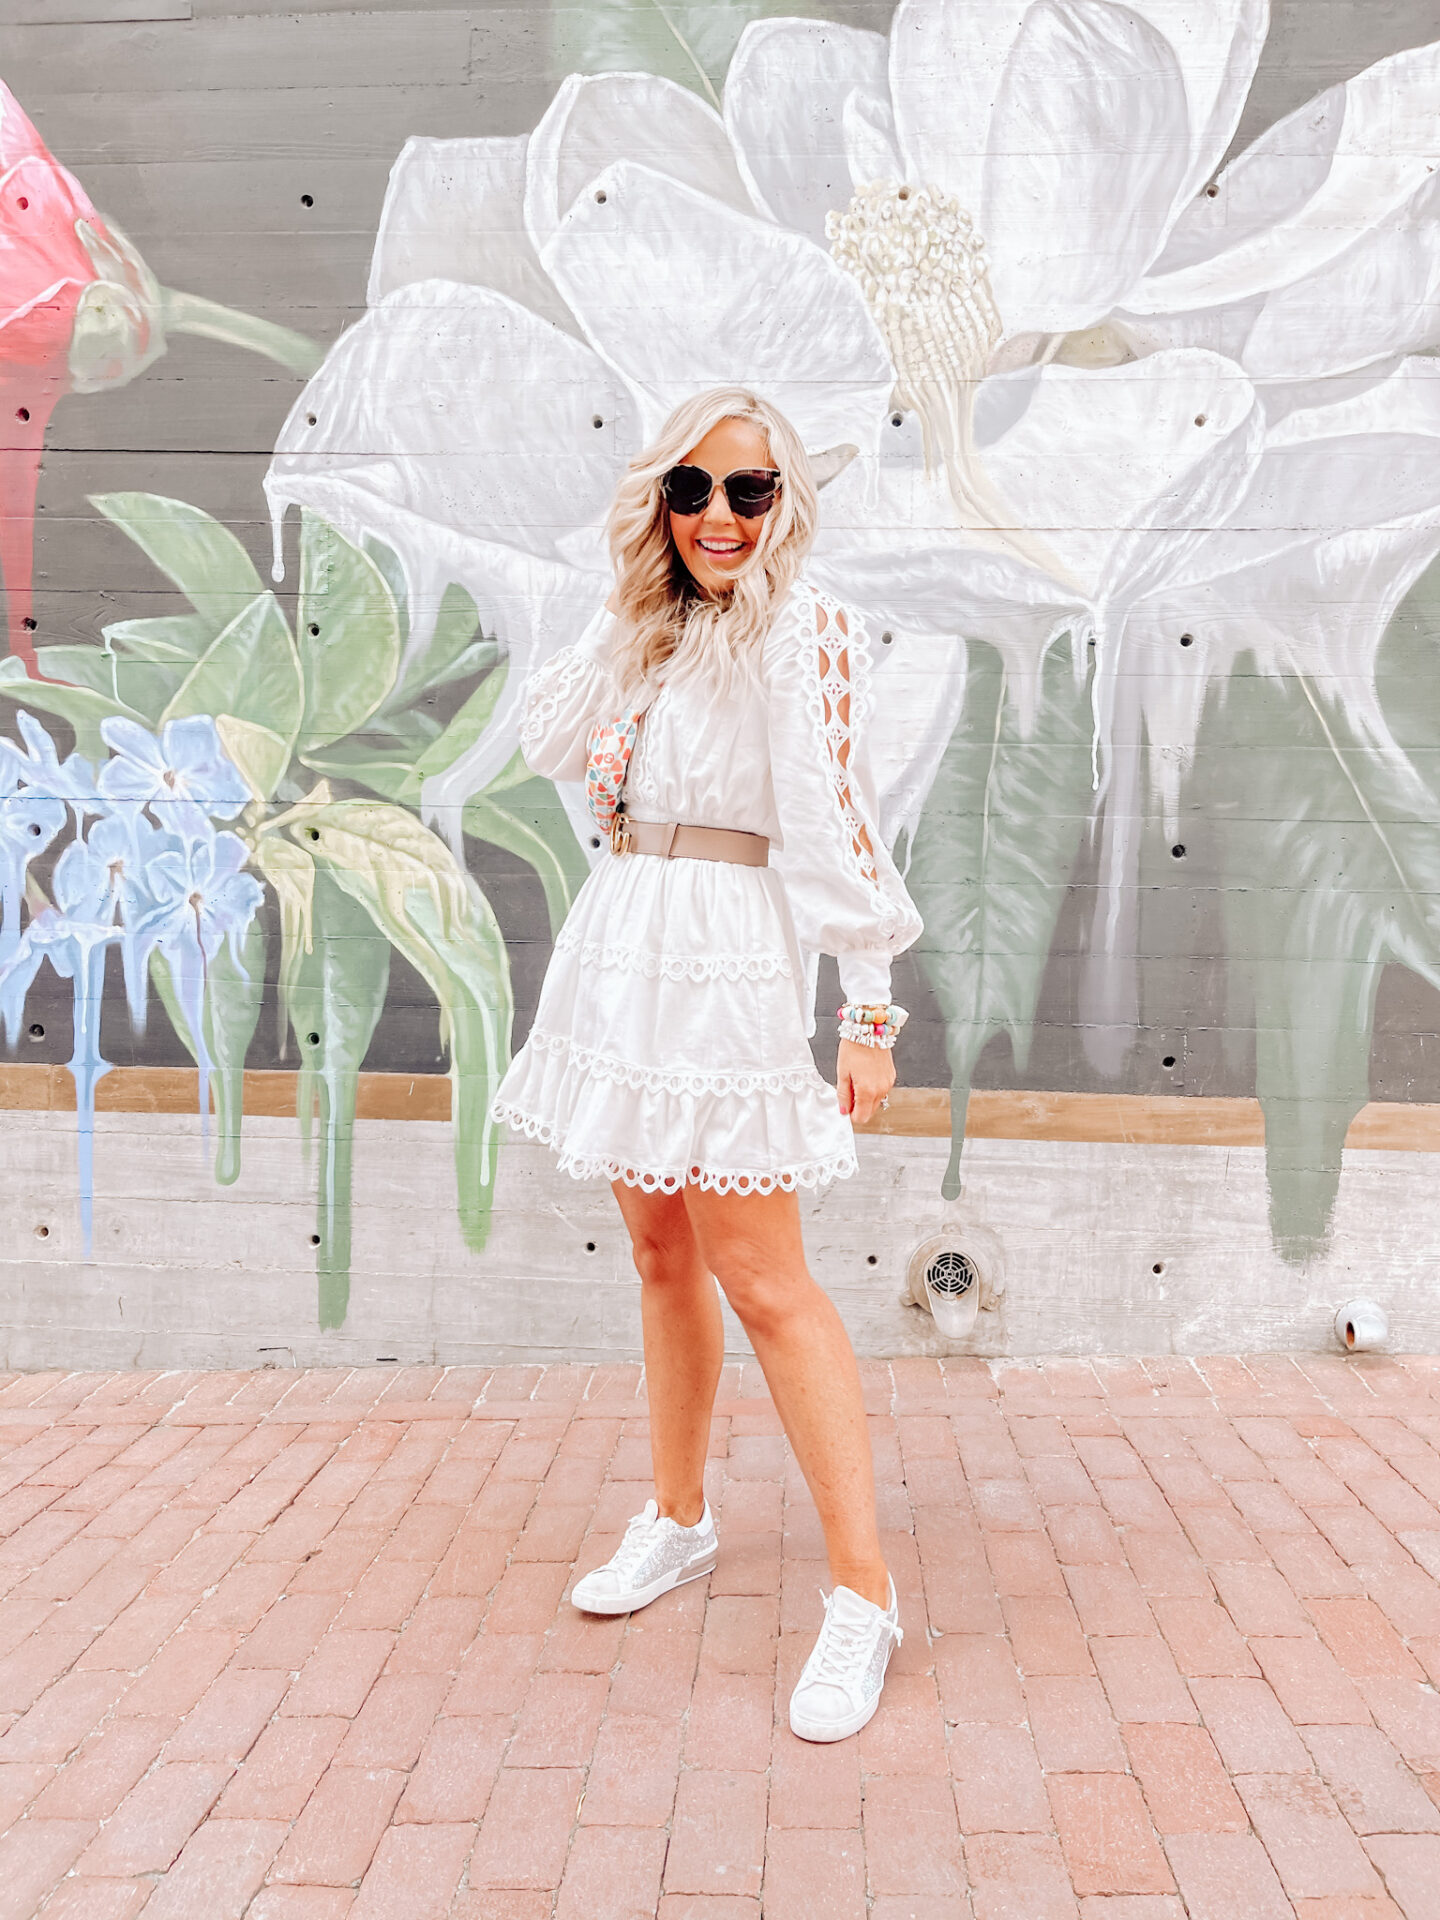 Girls Getaway by popular Nashville travel blog, Hello Happiness: image of Natasha Stoneking standing in front of a floral mural and wearing a white lace trim dress. 